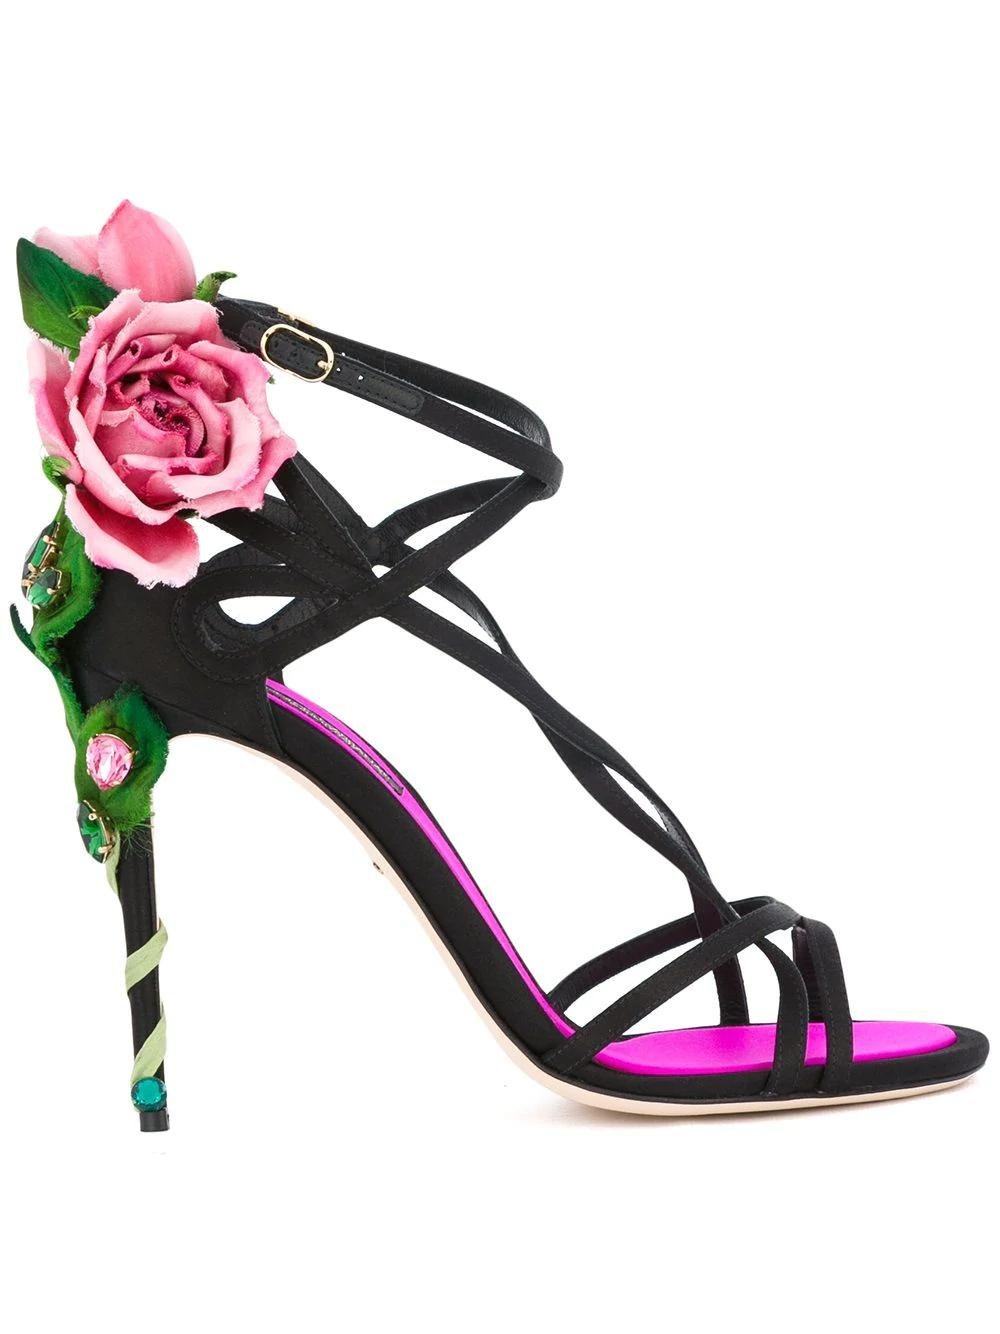 Keira sandals by DOLCE&GABBANA